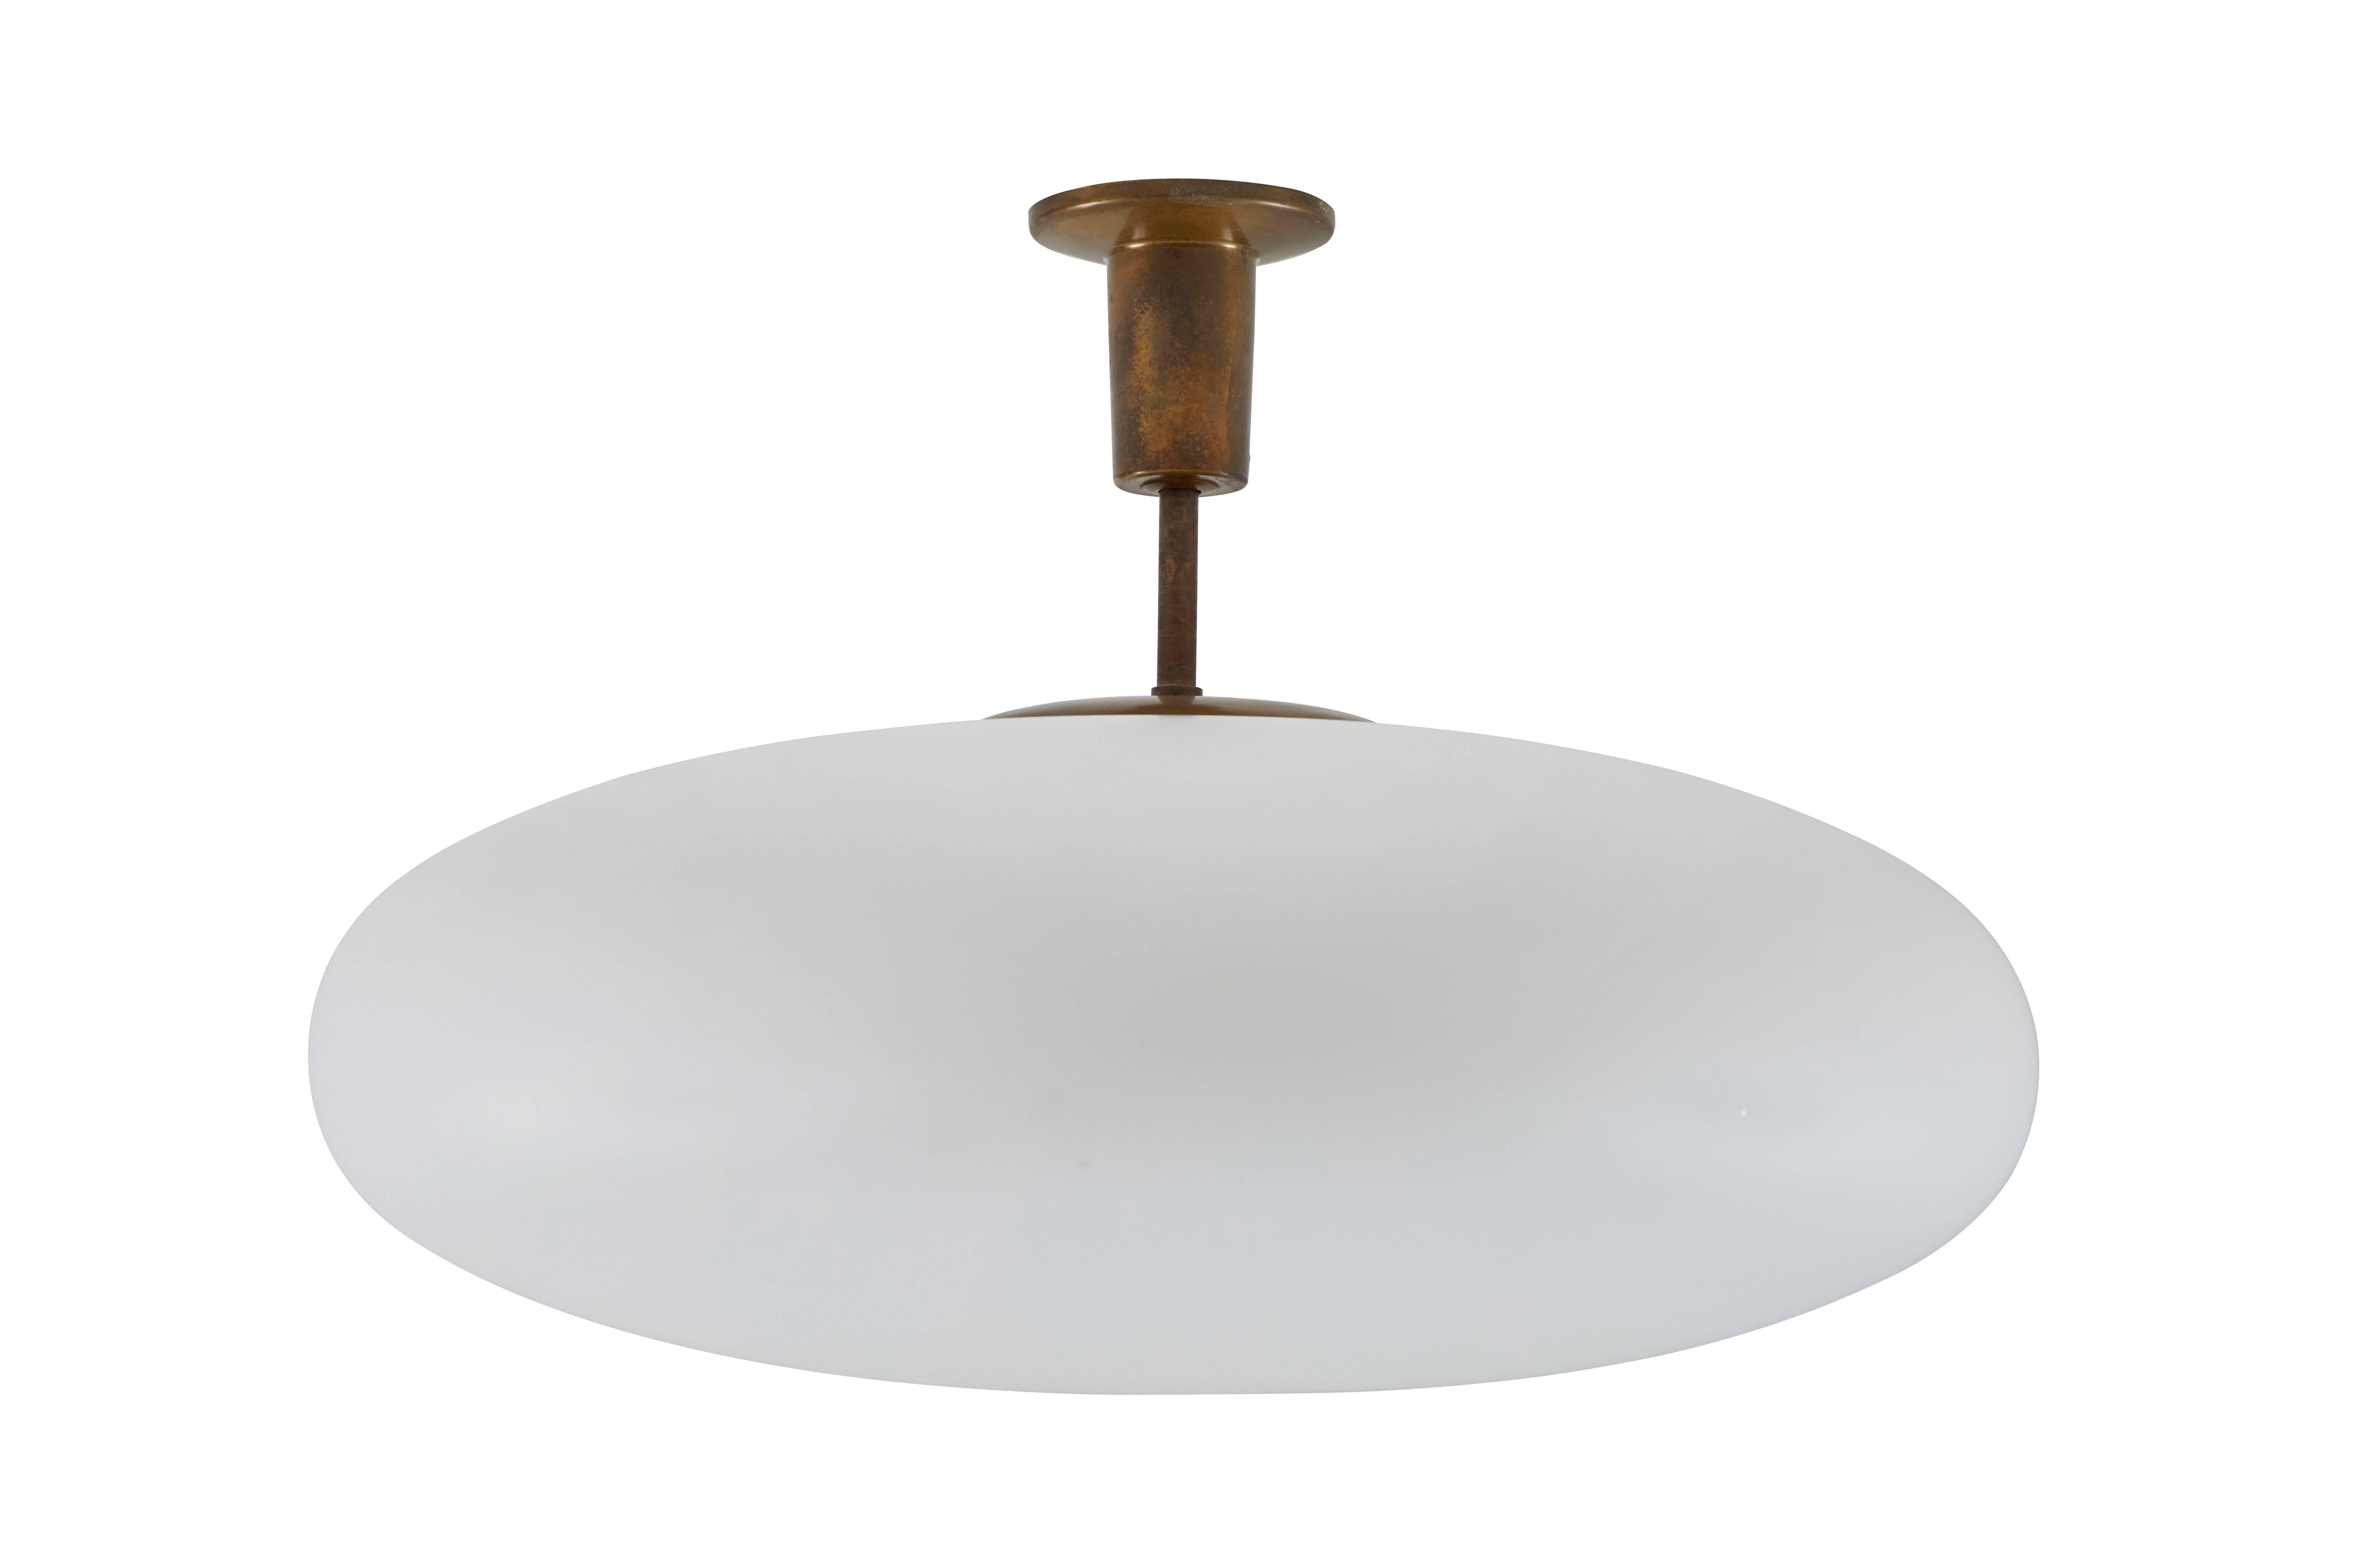 Flush mount ceiling lamp by Angelo Lelli for Arredoluce designed in Italy, 1955. Polished brass, opal glass. Certification from Archivio Arredoluce. Custom brass canopy. Wired for US junction boxes. Takes one E27 100w maximum bulb .

 